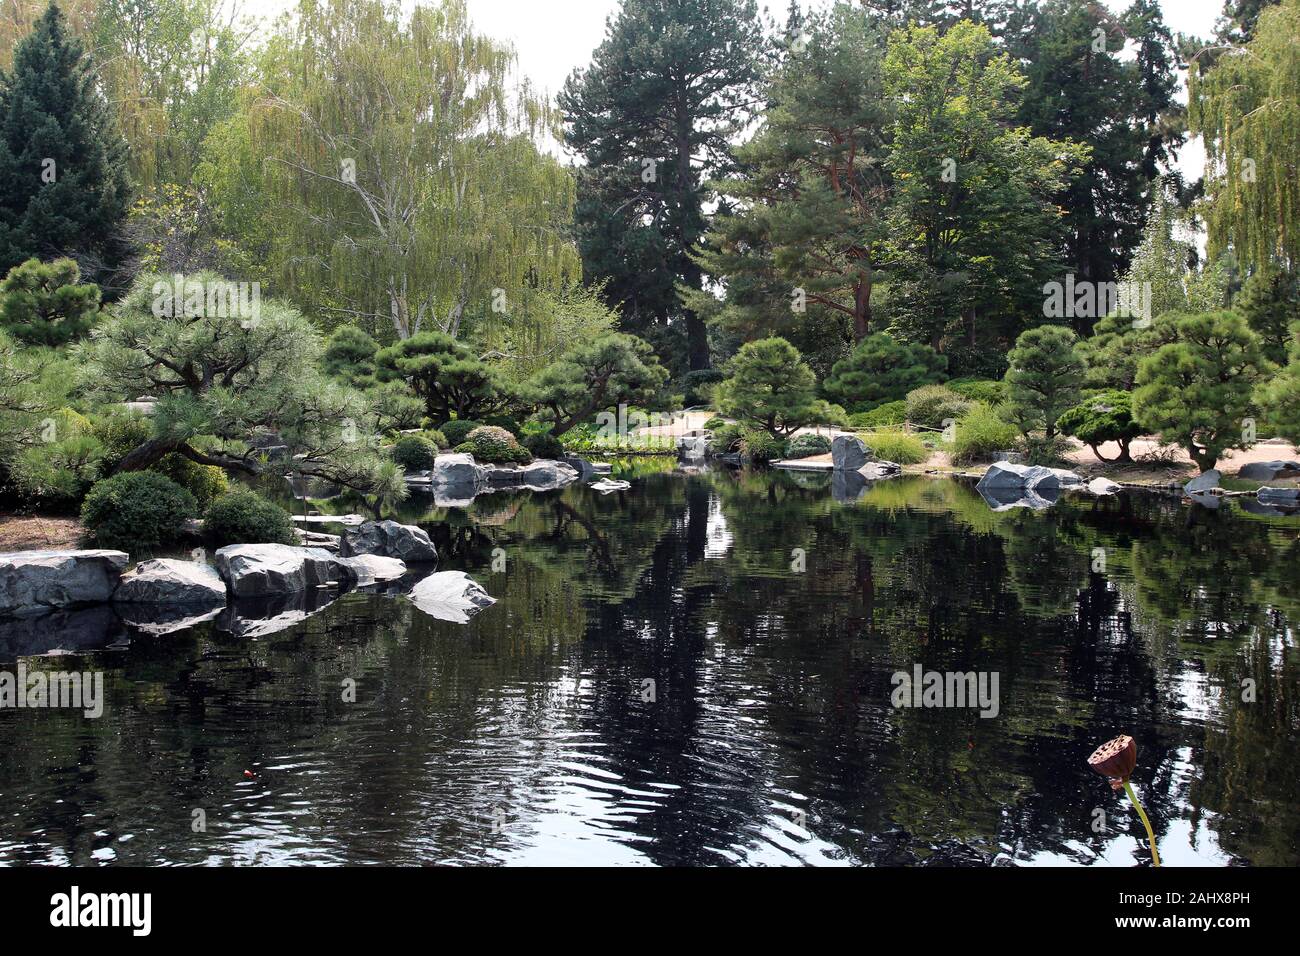 A Japanese Garden with manicured evergreen trees and bushes, a Cutleaf Weeping Birch tree, and a lake reflecting the trees in the water, in Colorado, Stock Photo